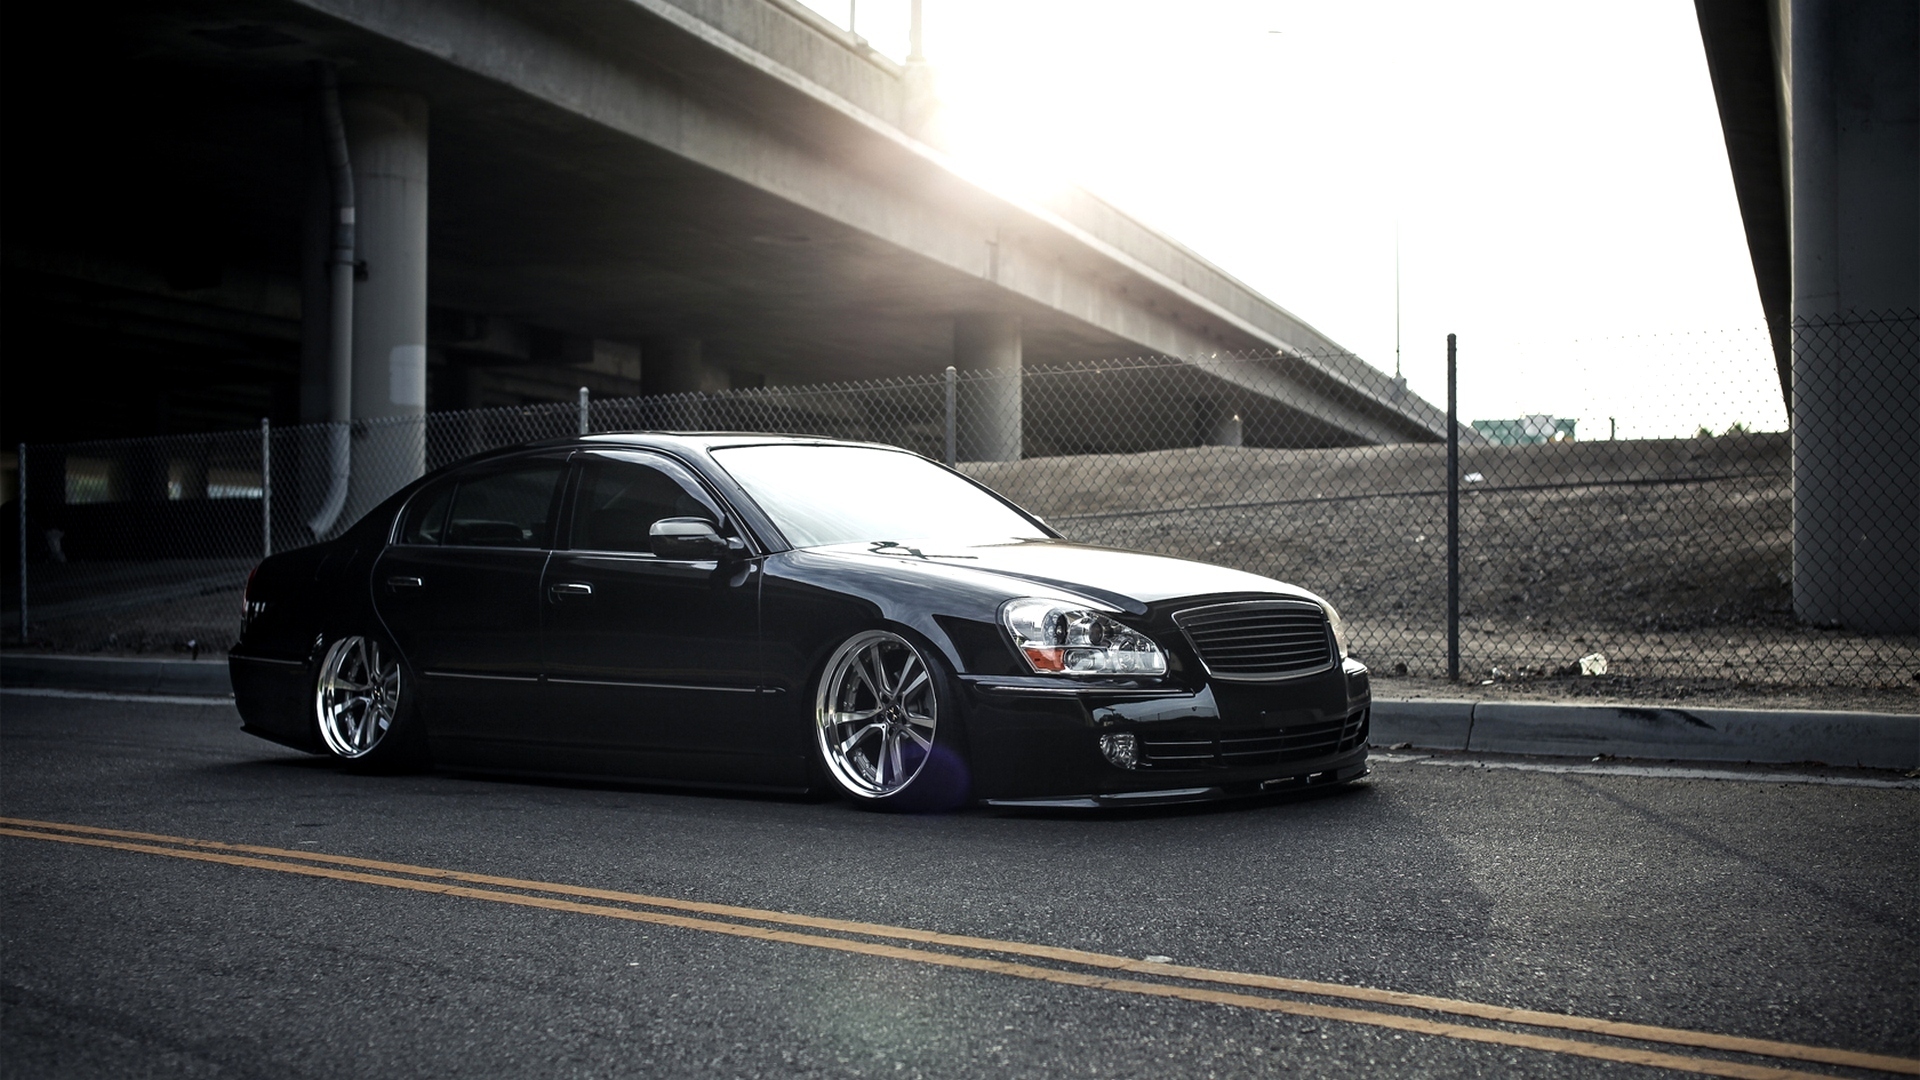 Black Infiniti Q45 Stance Vip Tuning Wallpapers Hd Desktop And Mobile Backgrounds